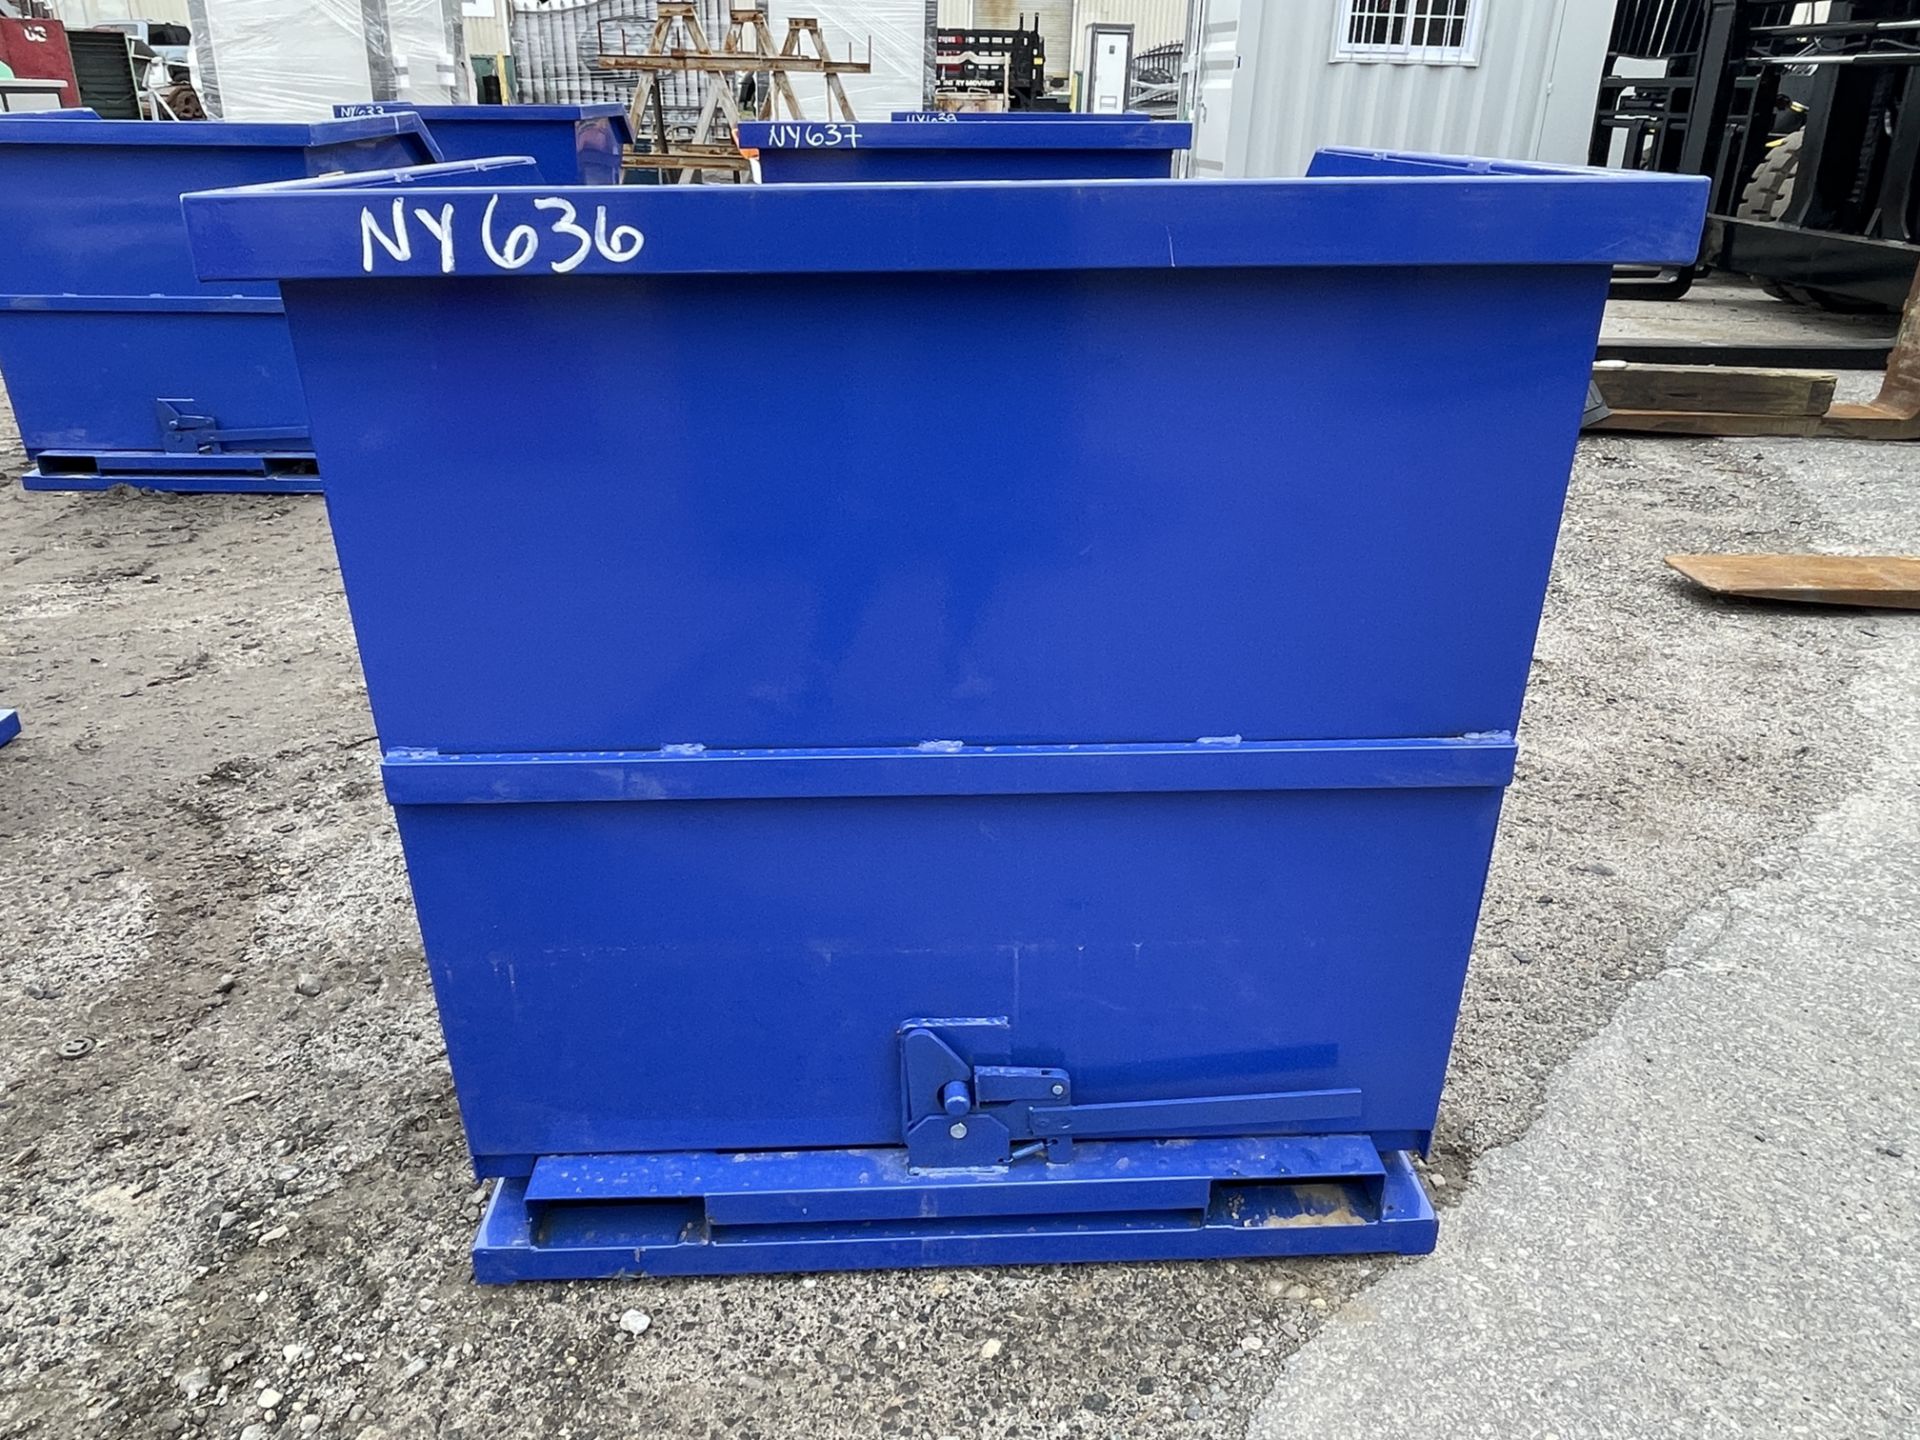 Brand New 1 Cubic Yard Self Dumping Hopper (NY626) - Image 2 of 5